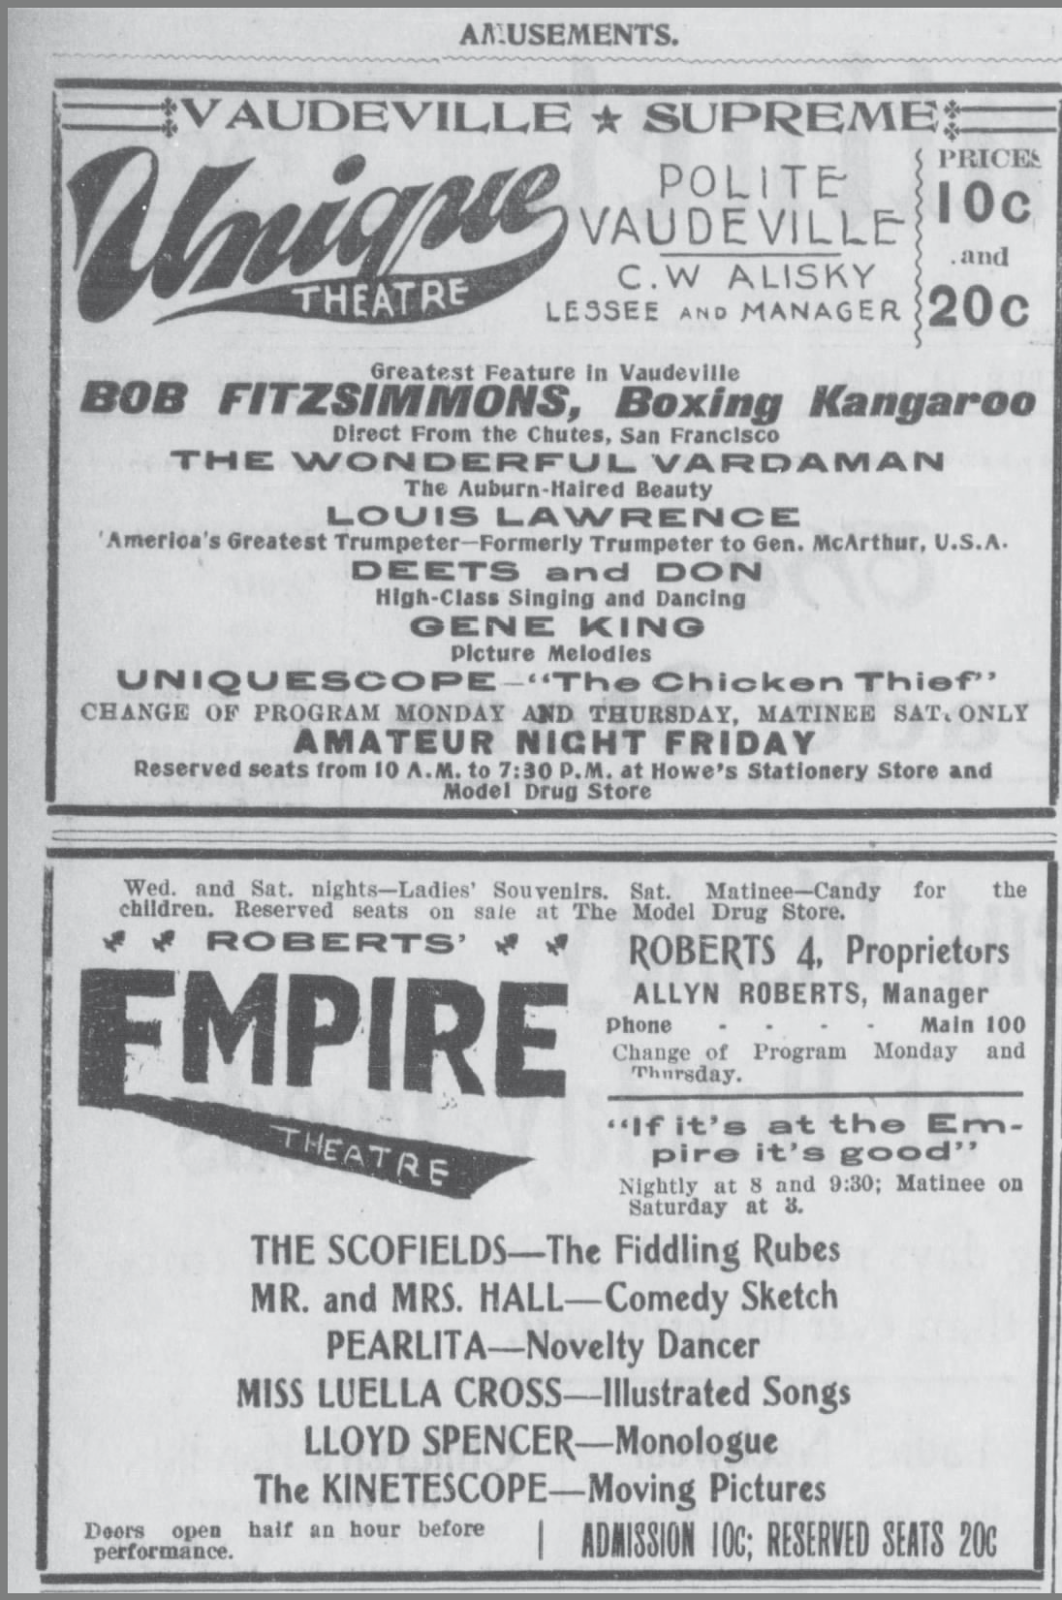 niqe and empire ads together__Dec_14__1905_.png